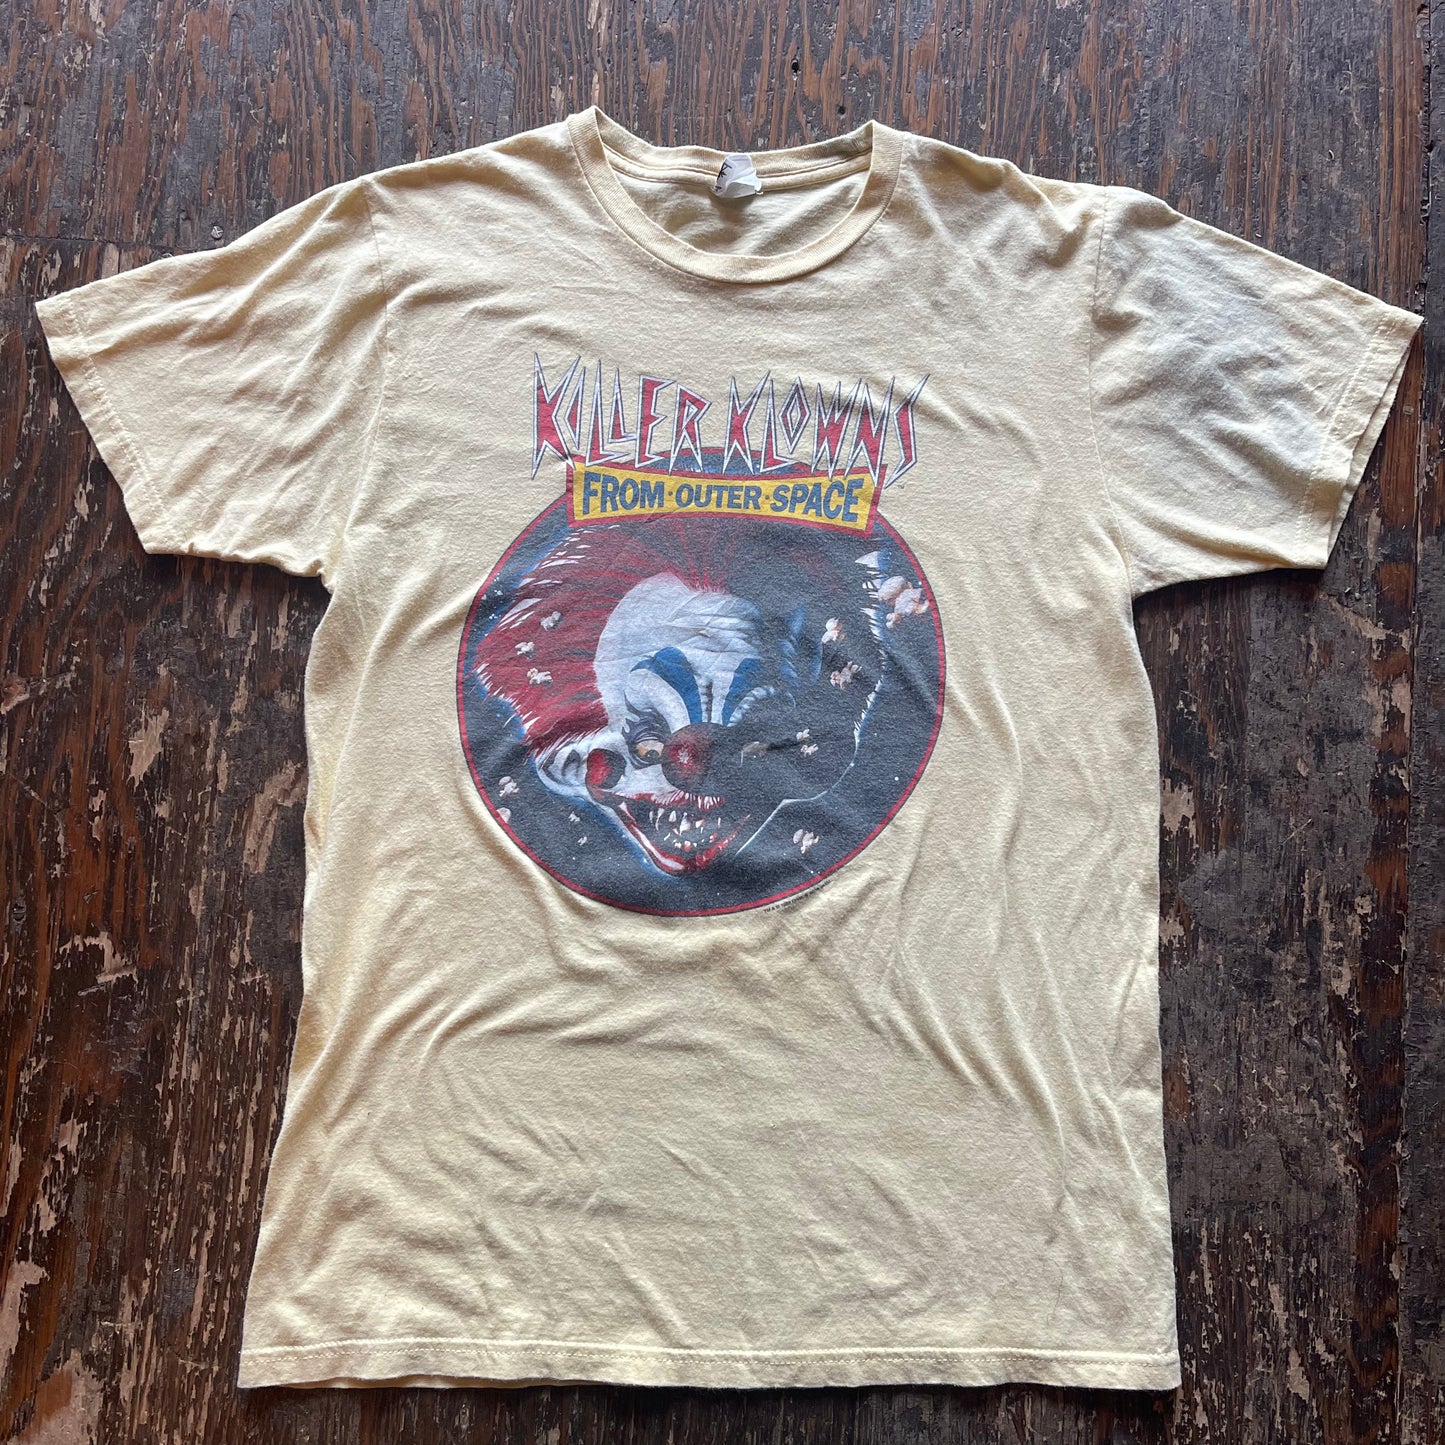 1988 Killer Clowns From Outer Space Tee Large